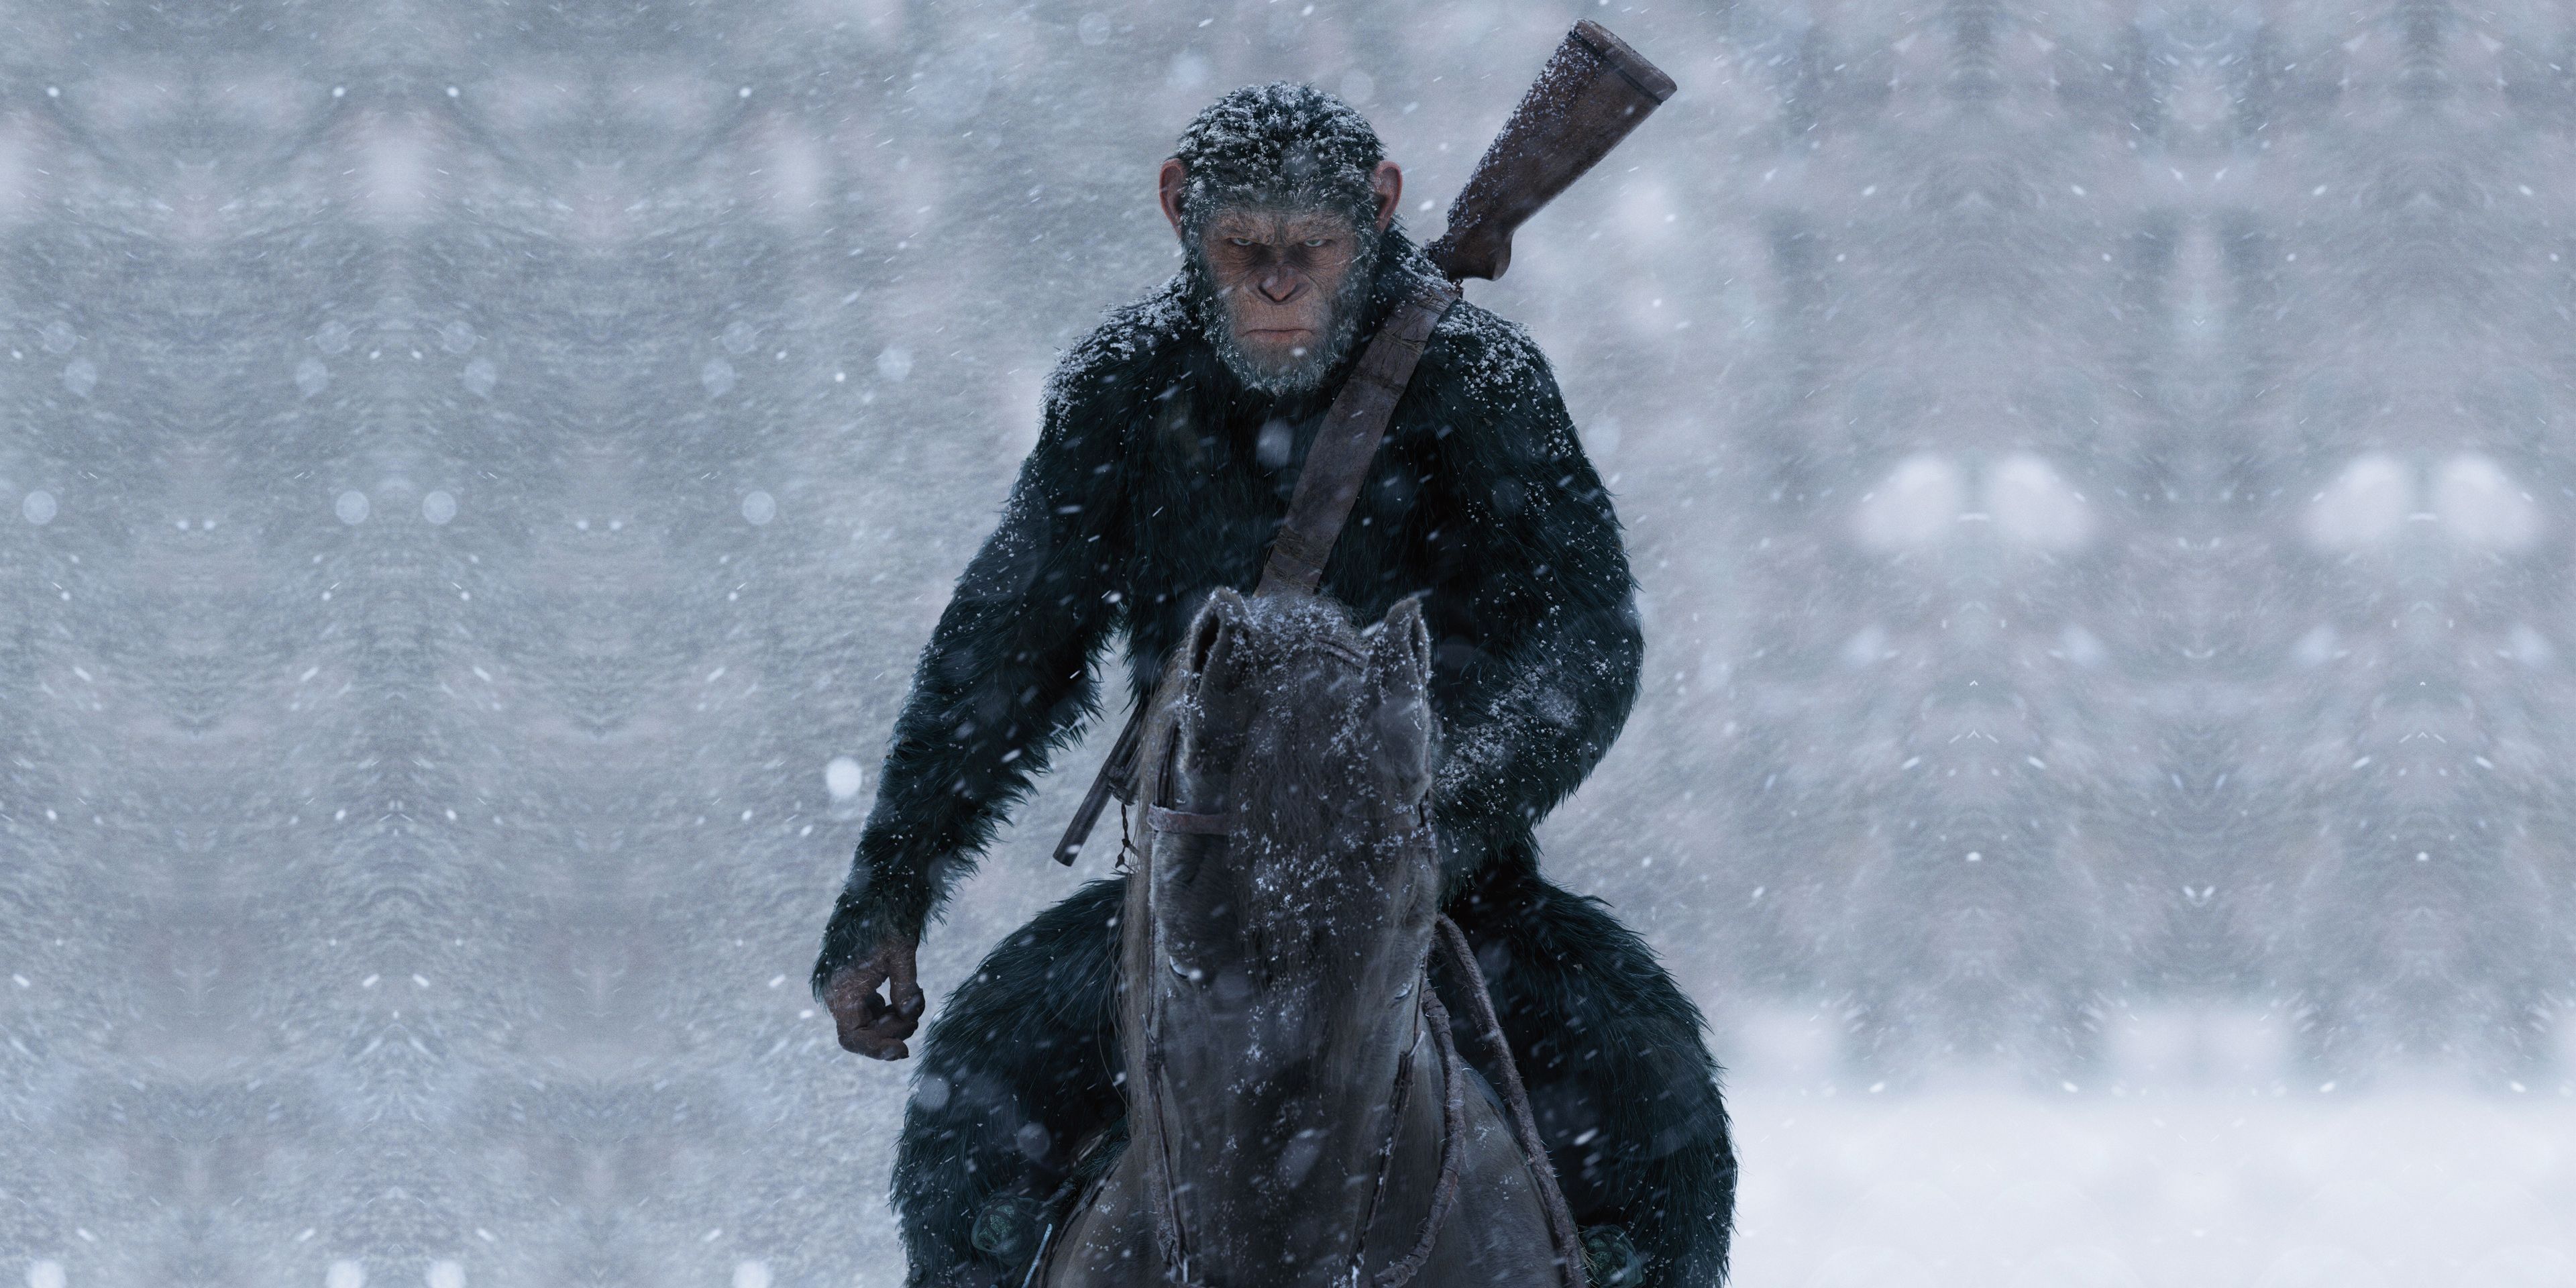 Caesar riding his horse in the snow in War for the Planet of the Apes